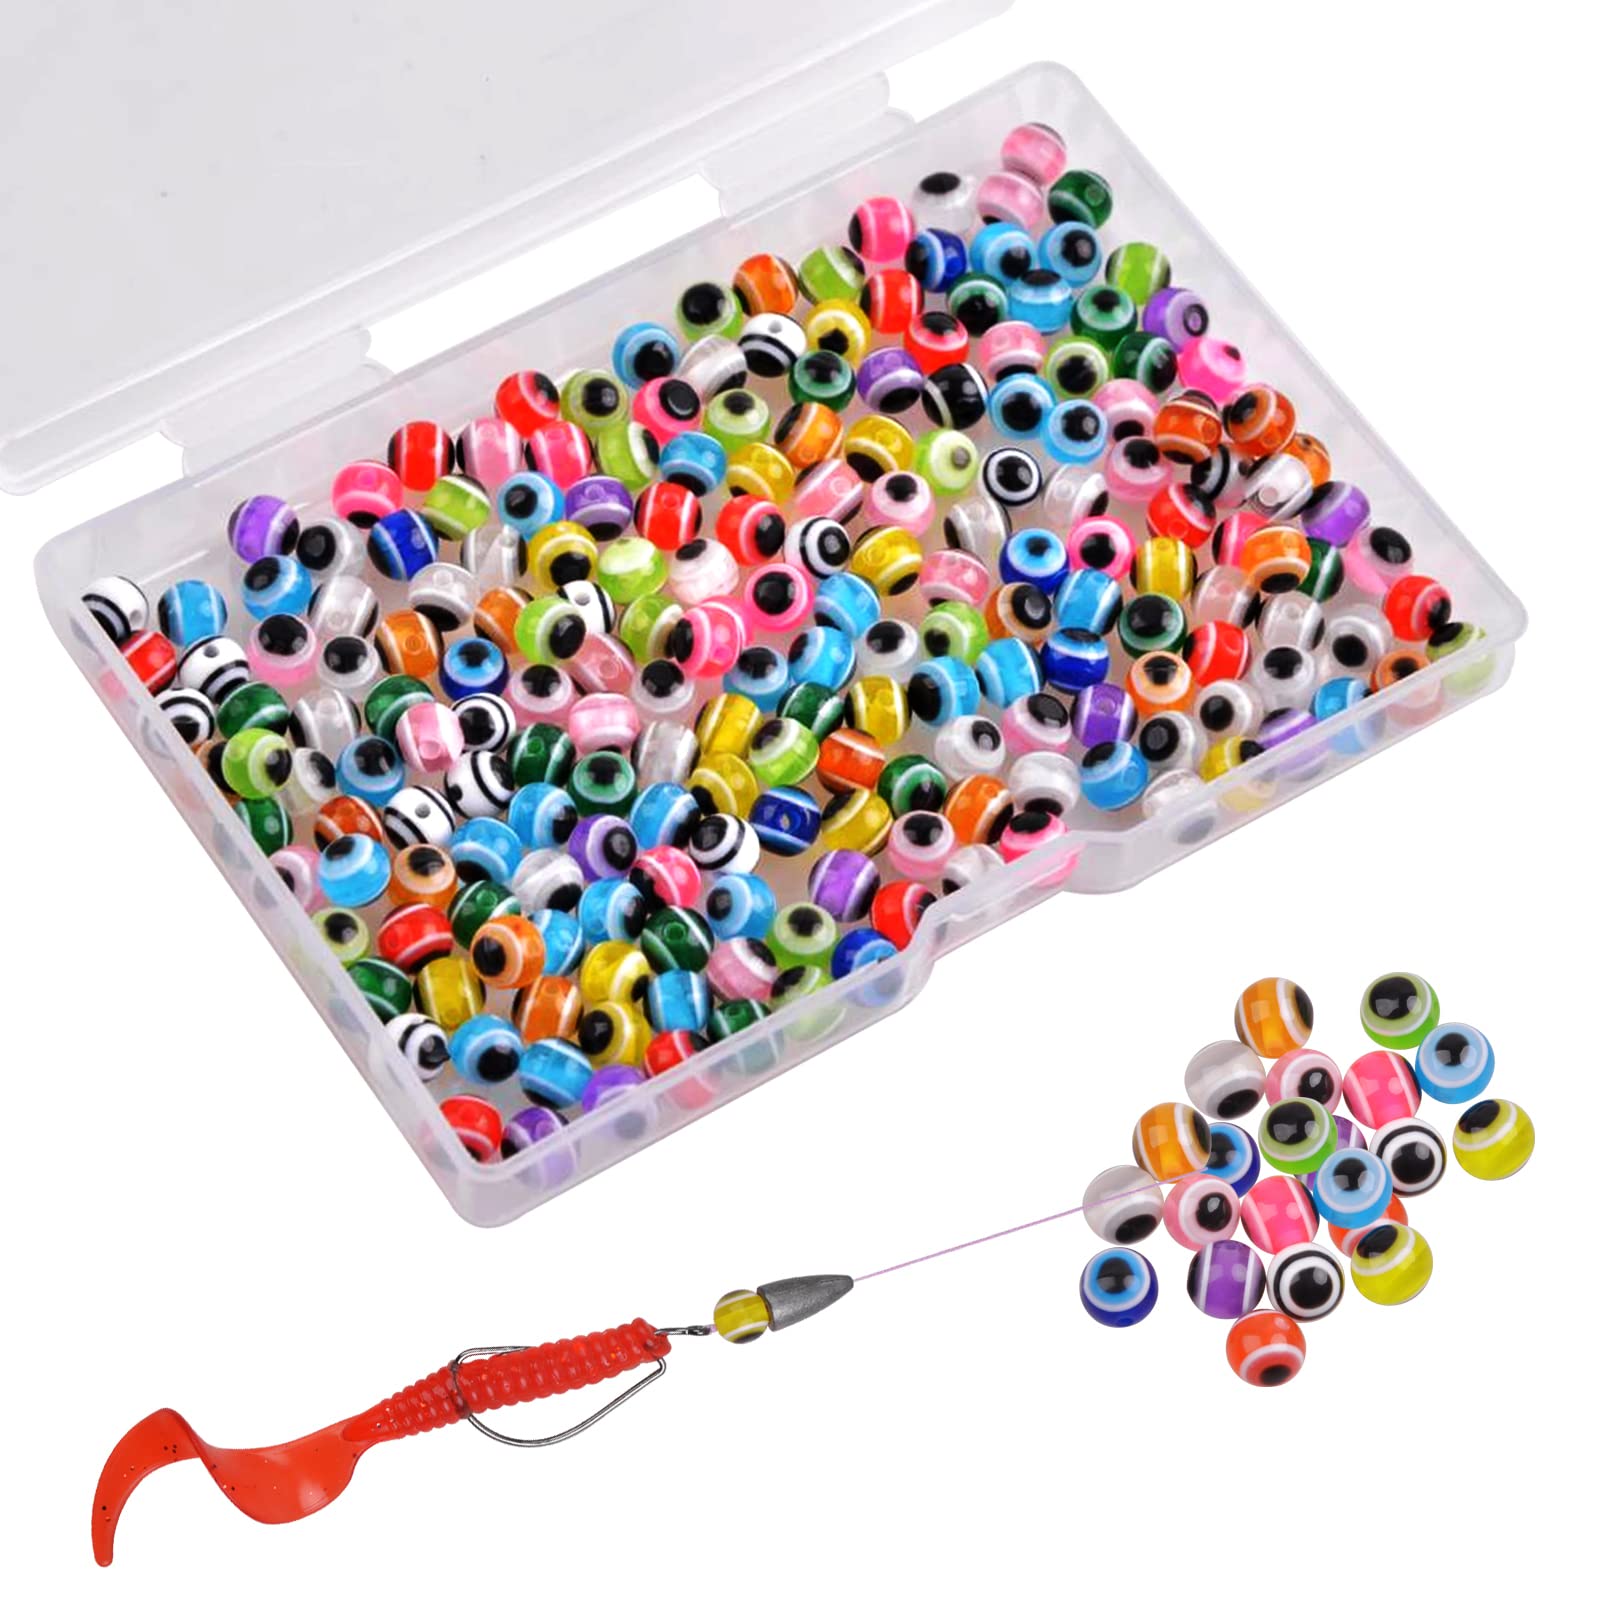 100pcs Fishing Line Beads 6mm/8mm Fishes Rigging Bead Assorted Fishing s  Carolina Rigs Taxes Rigs Slip Bobbers Rigs Setup Accessories Mixed 6mm 